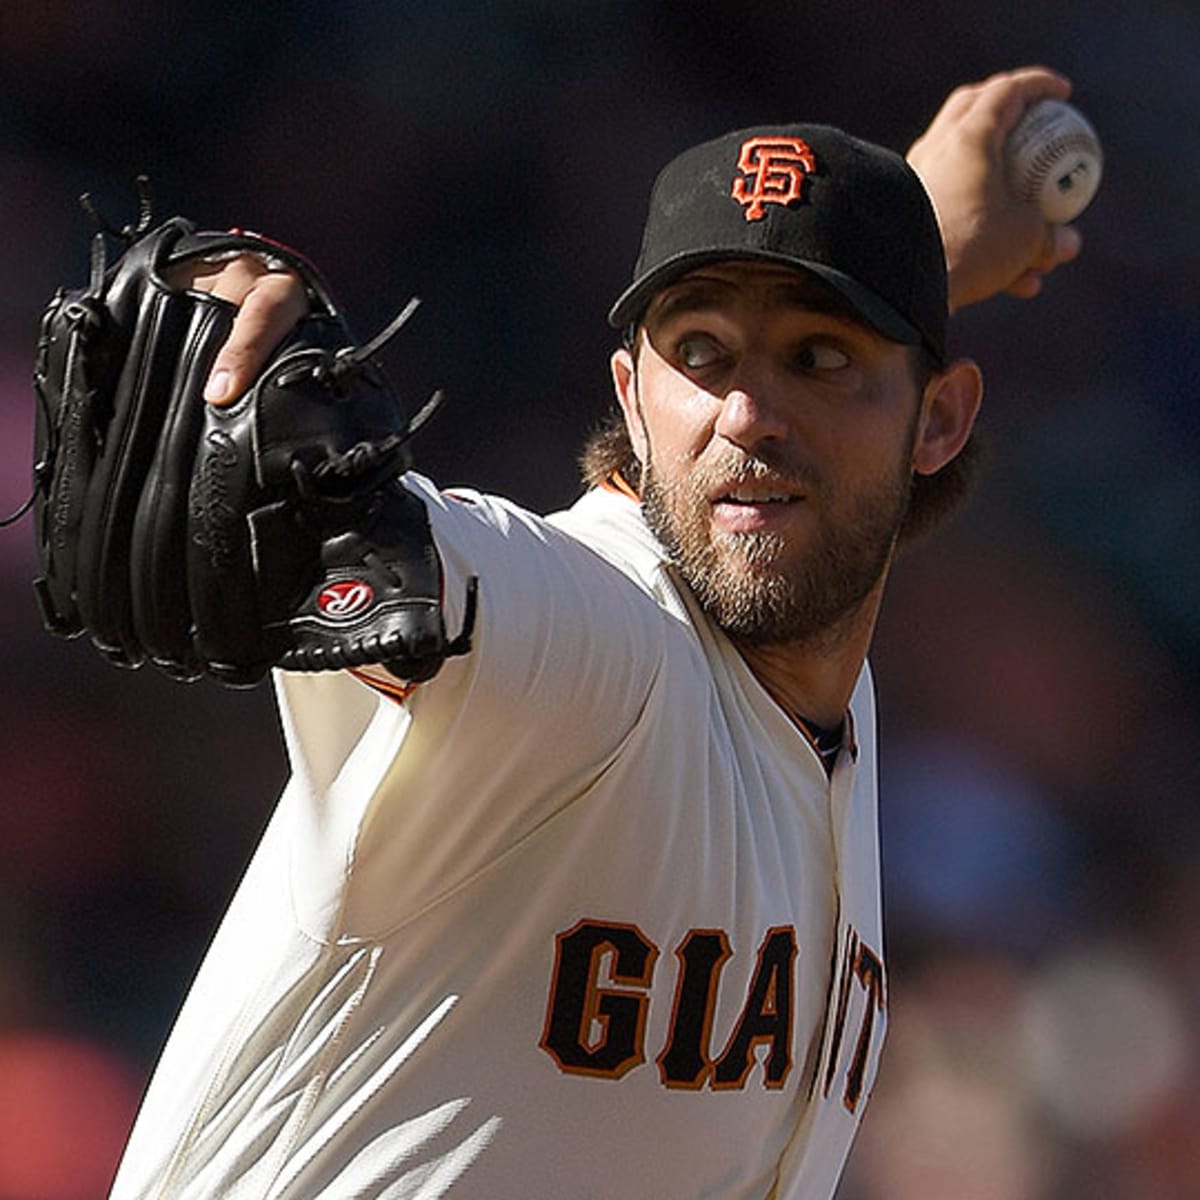 Madison Bumgarner Throws a No-Hitter. Kind Of. - The New York Times